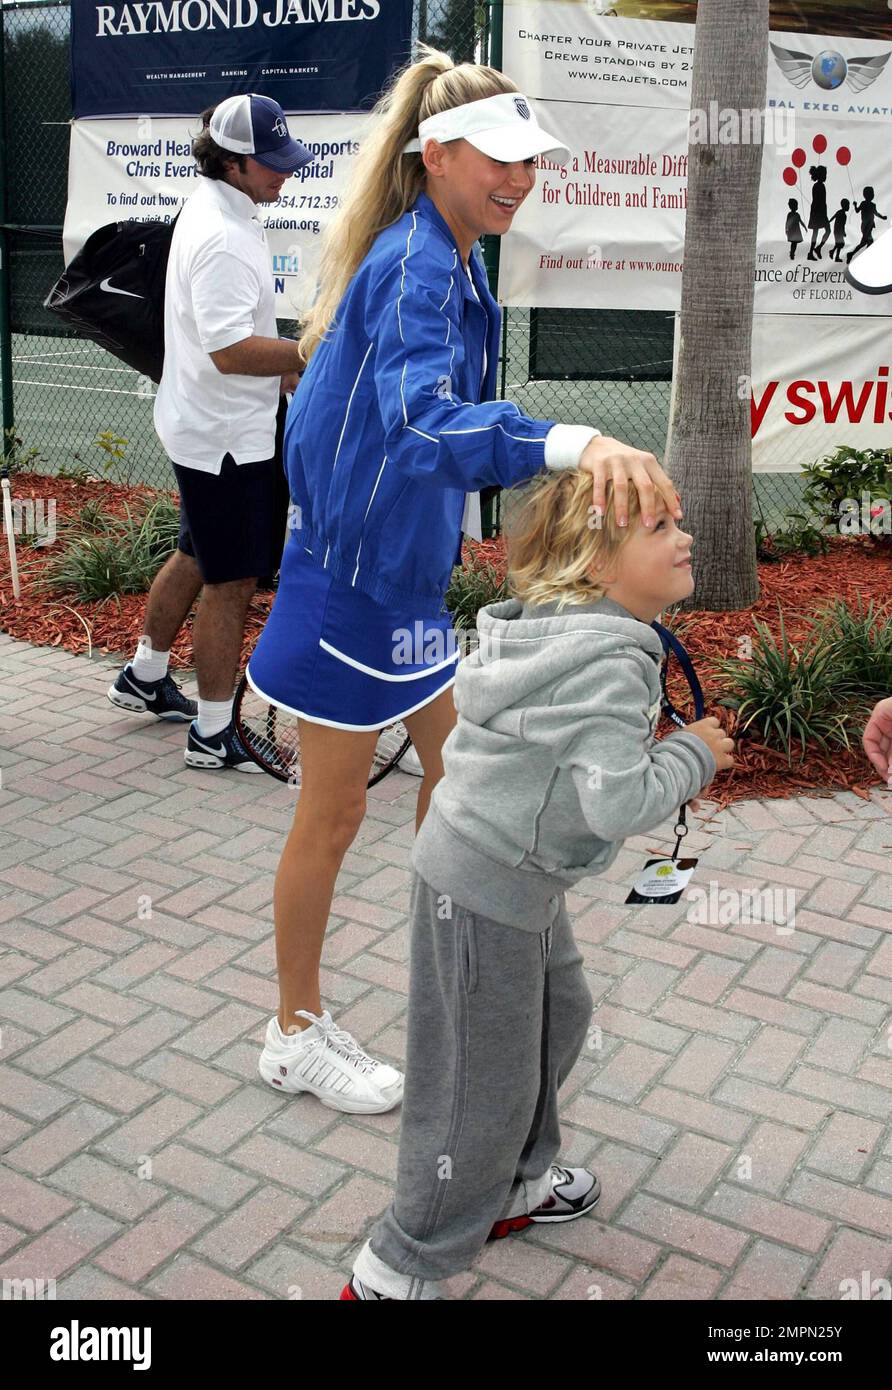 Tennis great Anna Kournikova and her brother Allan share a hug after her  match in the Chris Evert Pro-Celebrity Tennis Classic at the Delray Beach  Tennis Center in Delray Beach, FL. 11/07/10